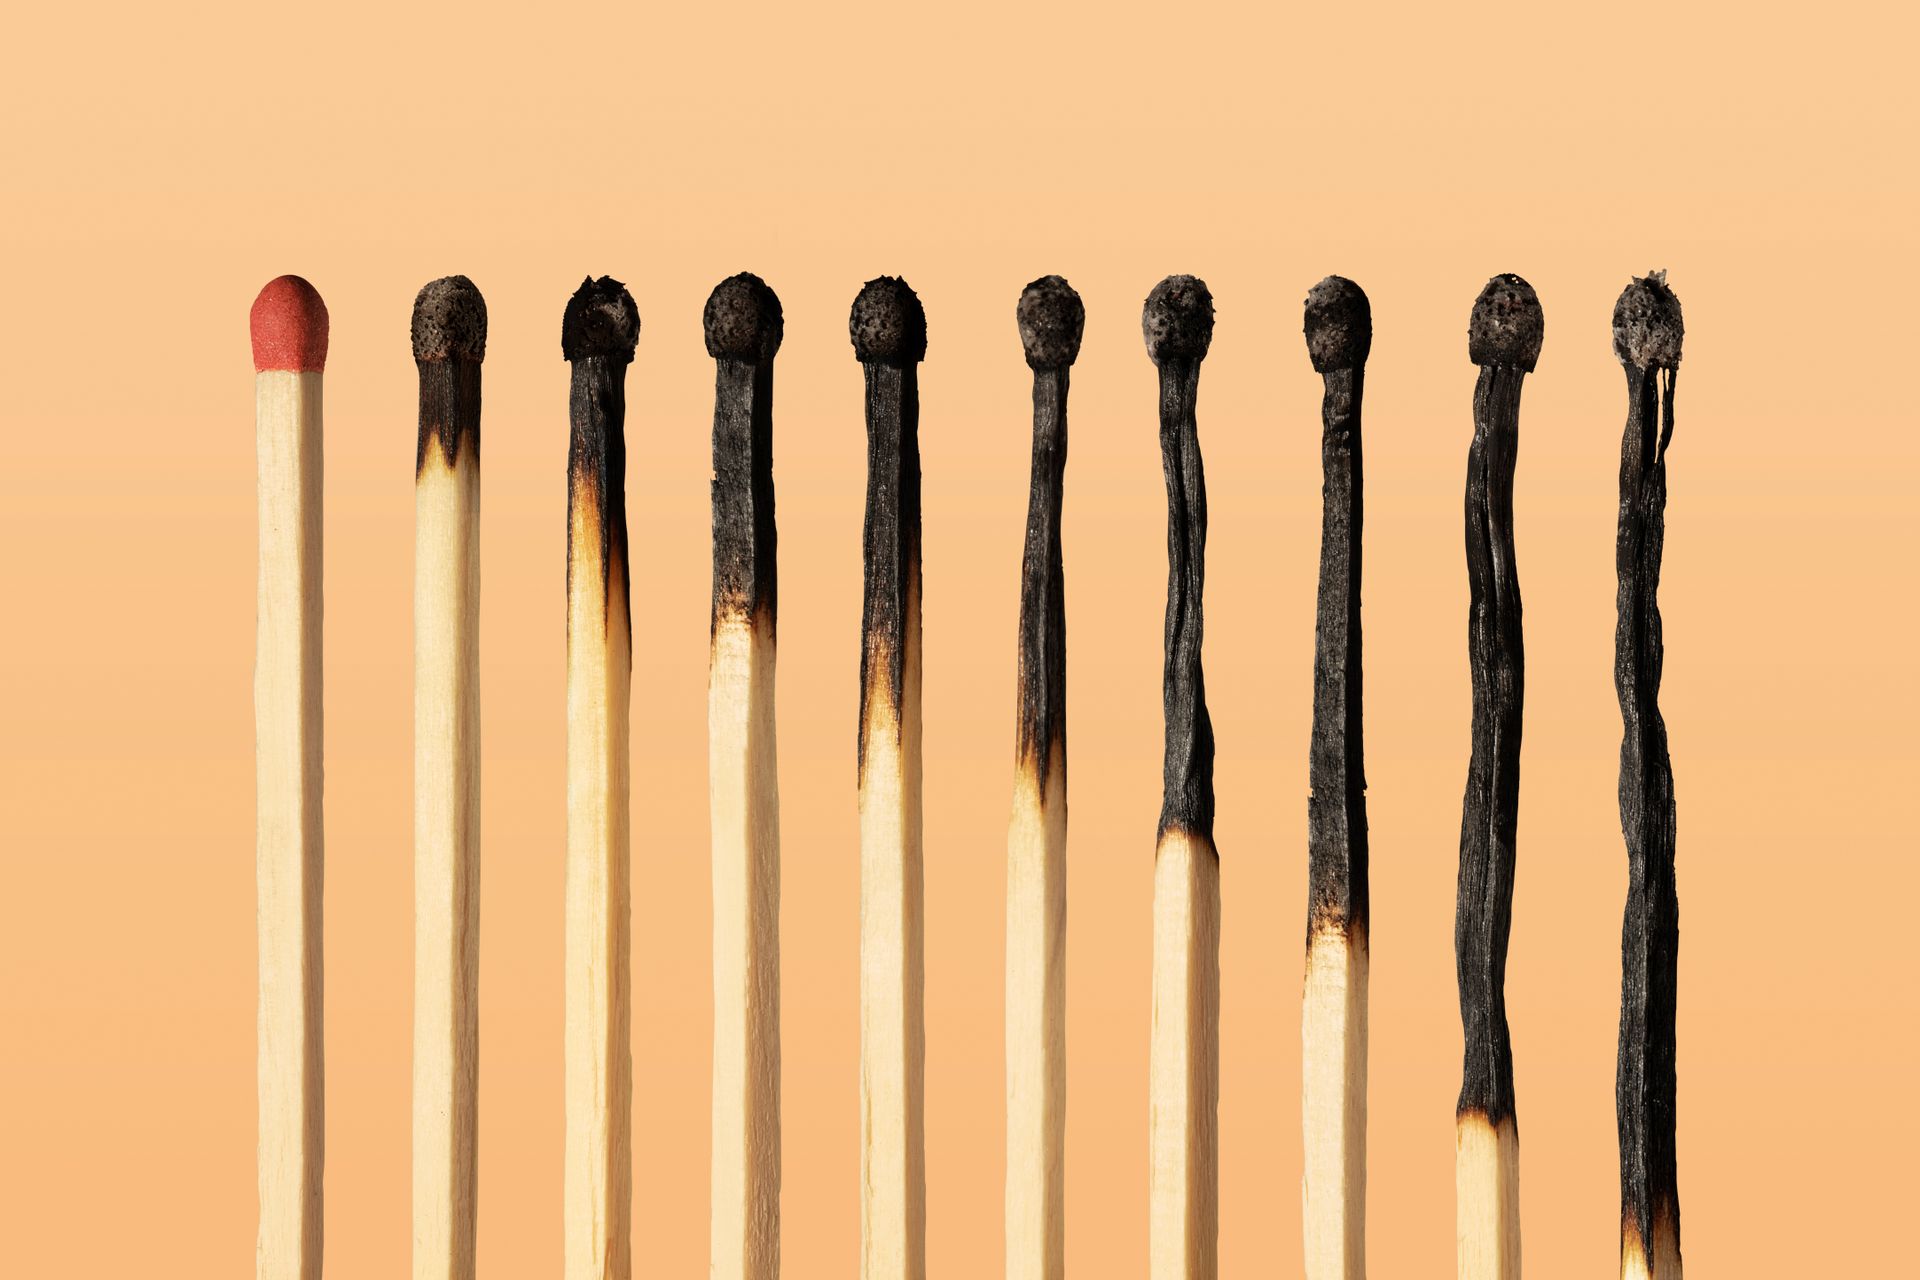 Matches against an orange background with some of them burned